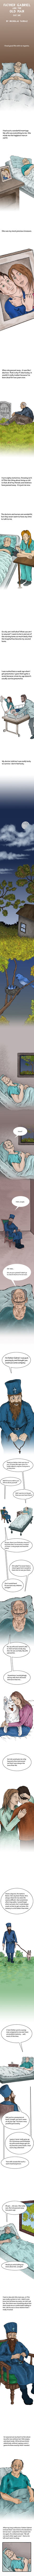 Father Gabriel and the Old Man (Part 1) Web Comic by Nicholas Tamraz